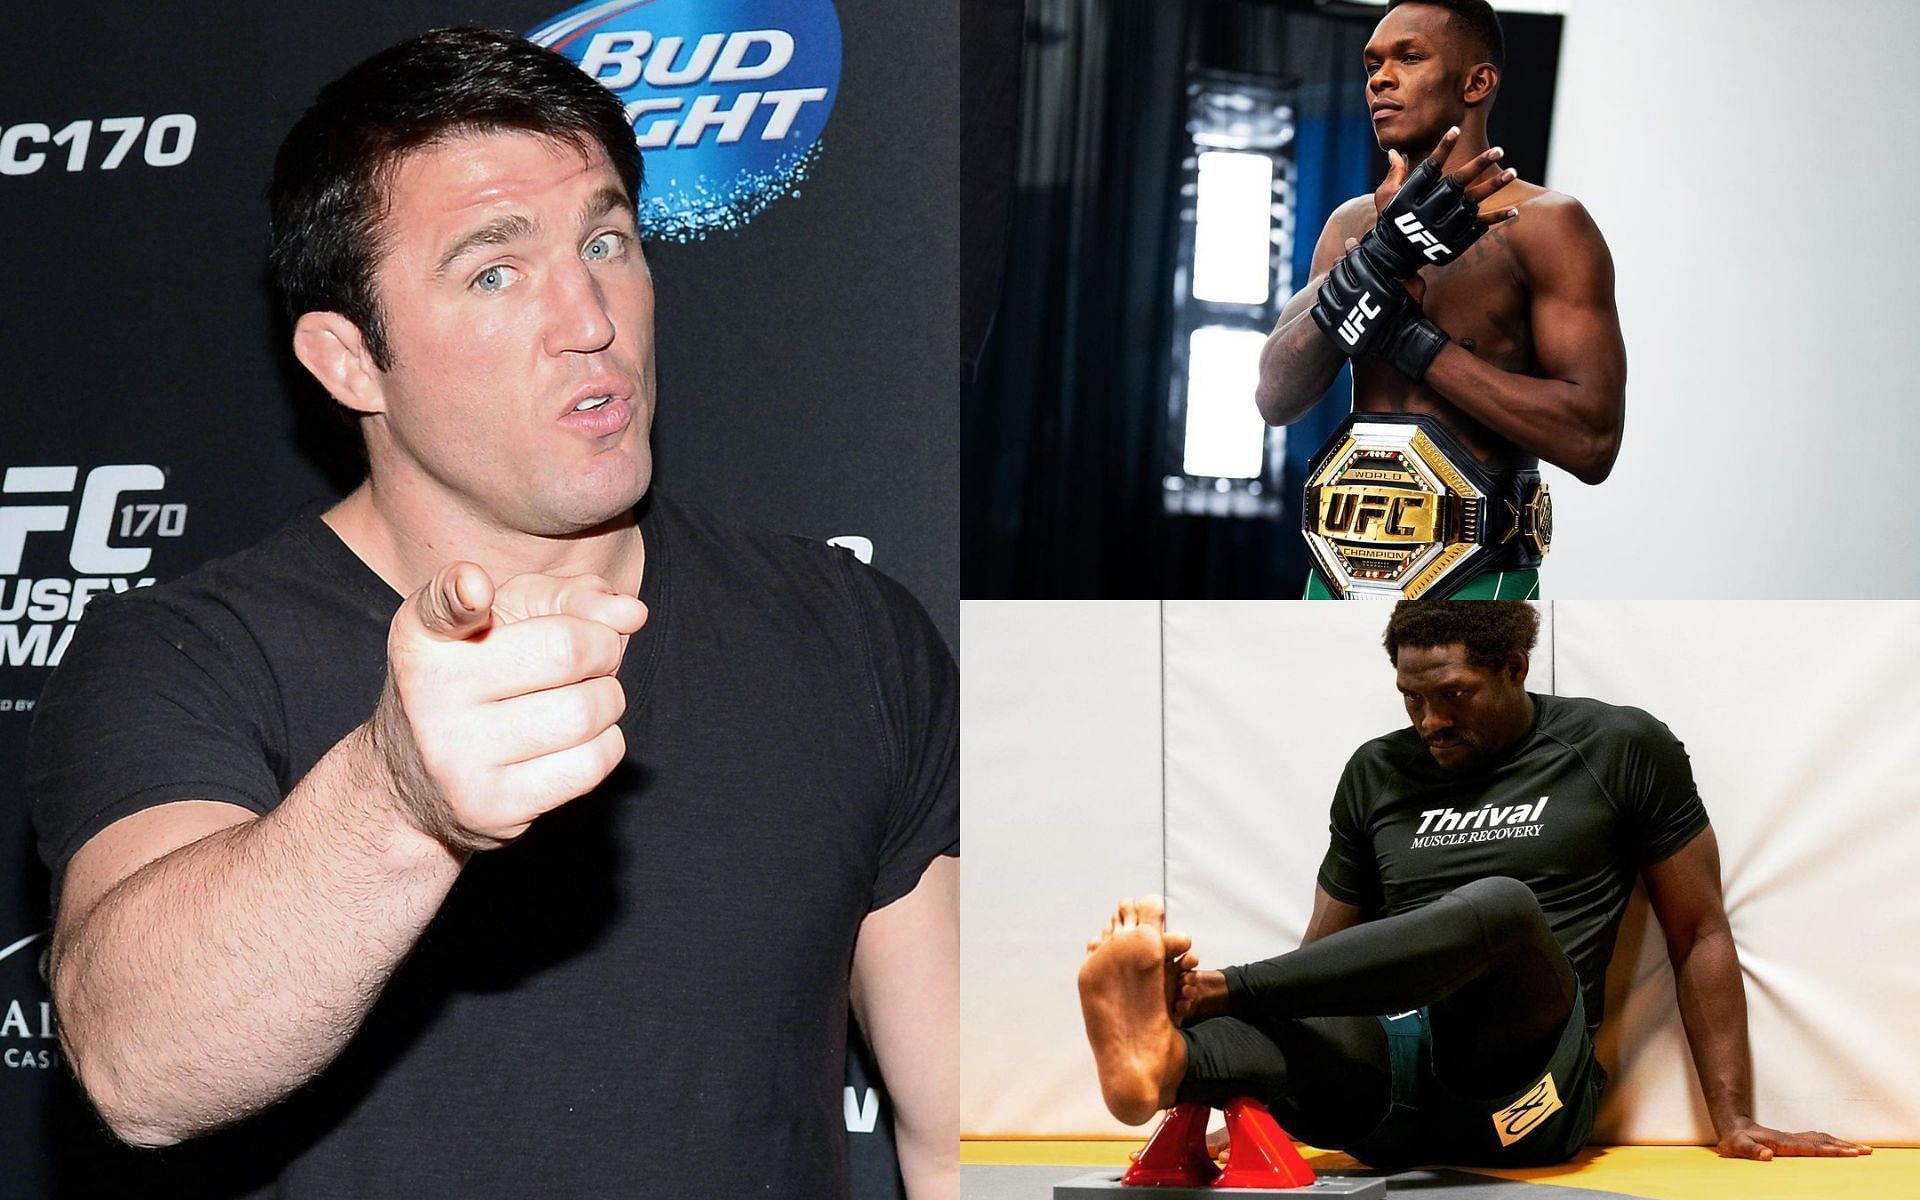 Chael Sonnen (left), Israel Adesanya (top right), and Jared Cannonier (bottom right) [Images courtesy of Getty, @stylebender Instagram, and @killagorillamma Instagram]